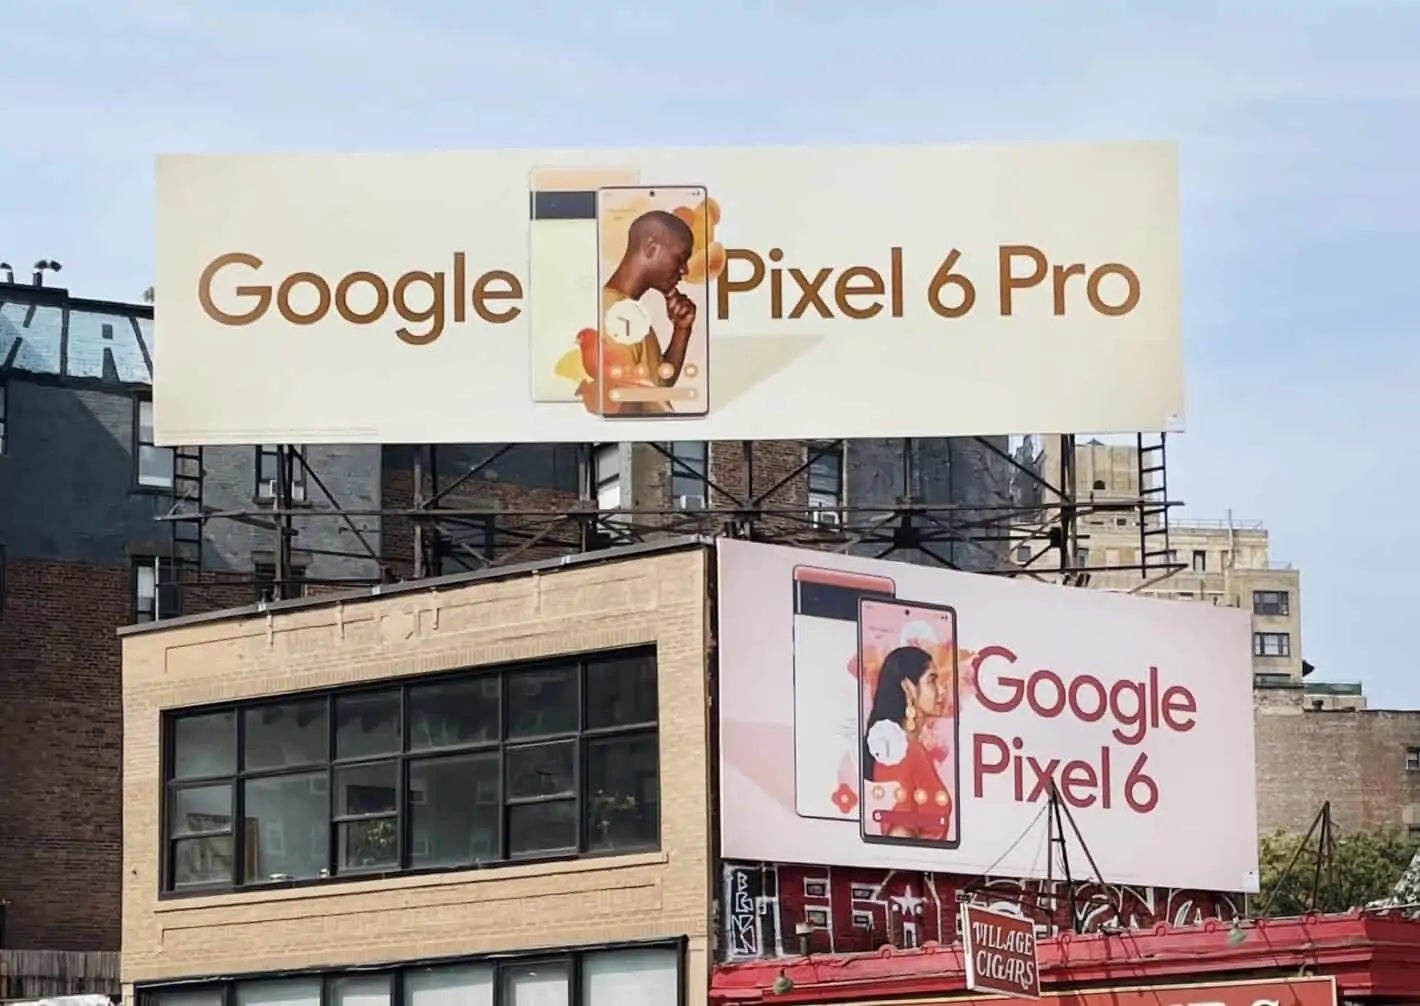 Google is putting up Pixel 6 billboards in major cities - Google promotes the Pixel 6 line with billboards and...potato chips?